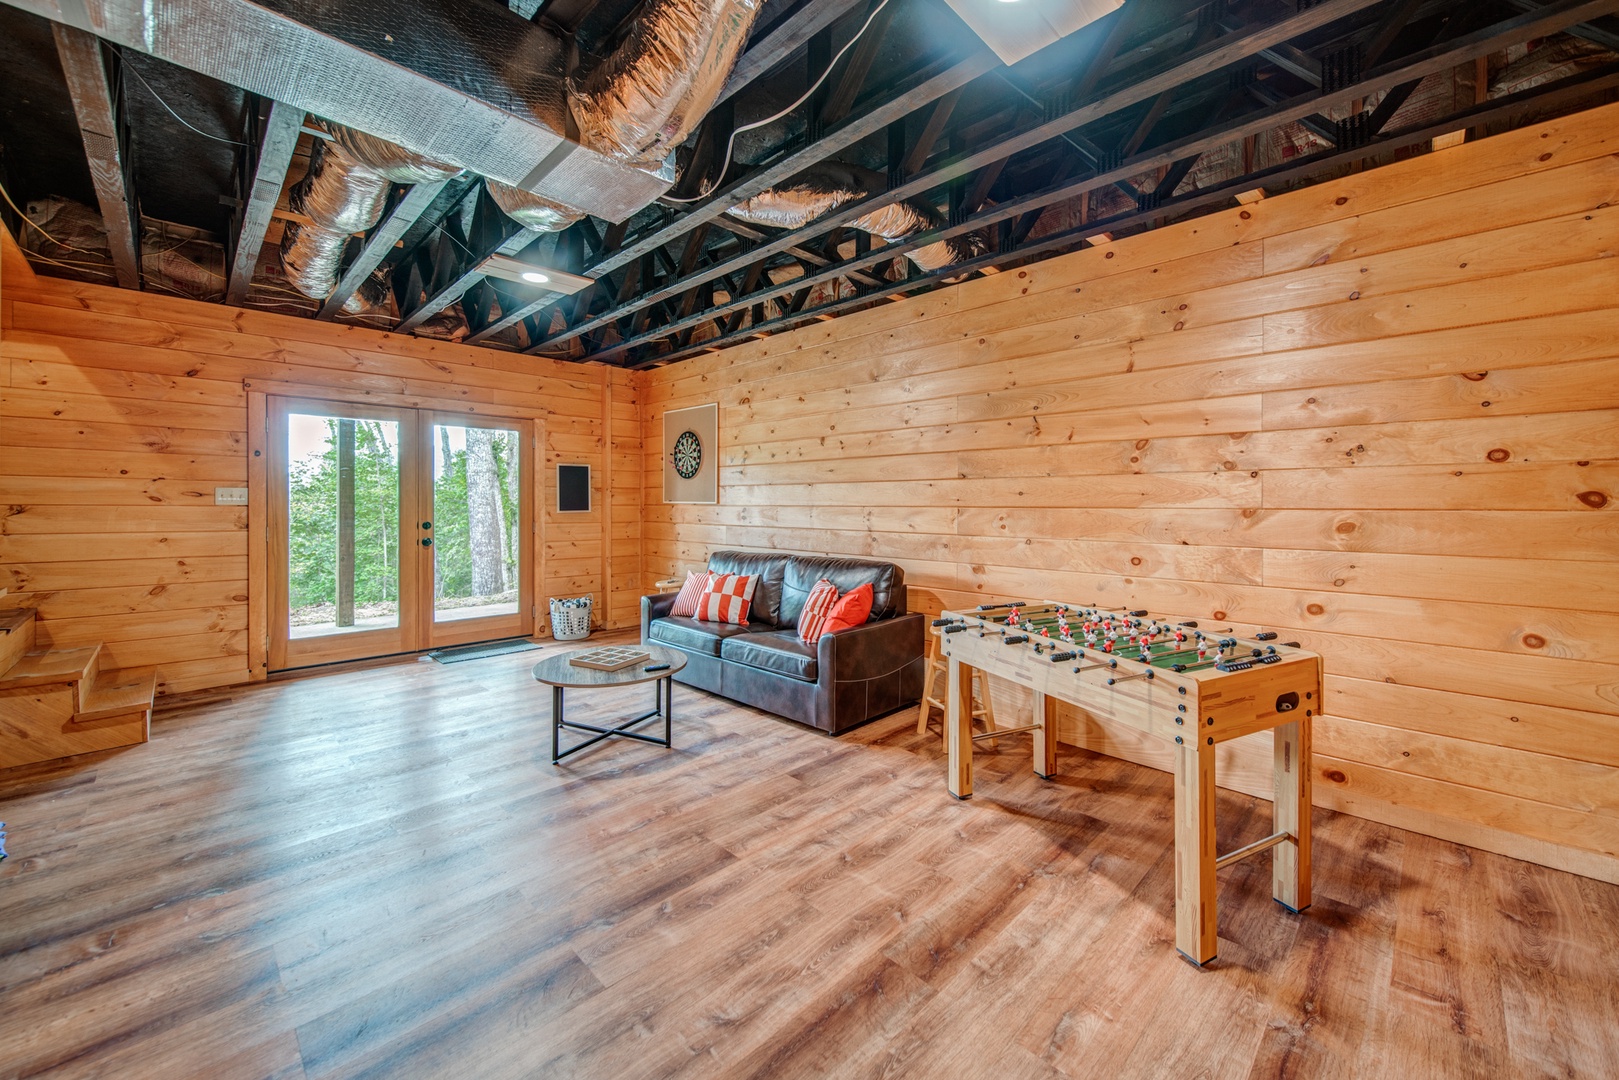 Get competitive with cornhole, foosball, & darts in the game room